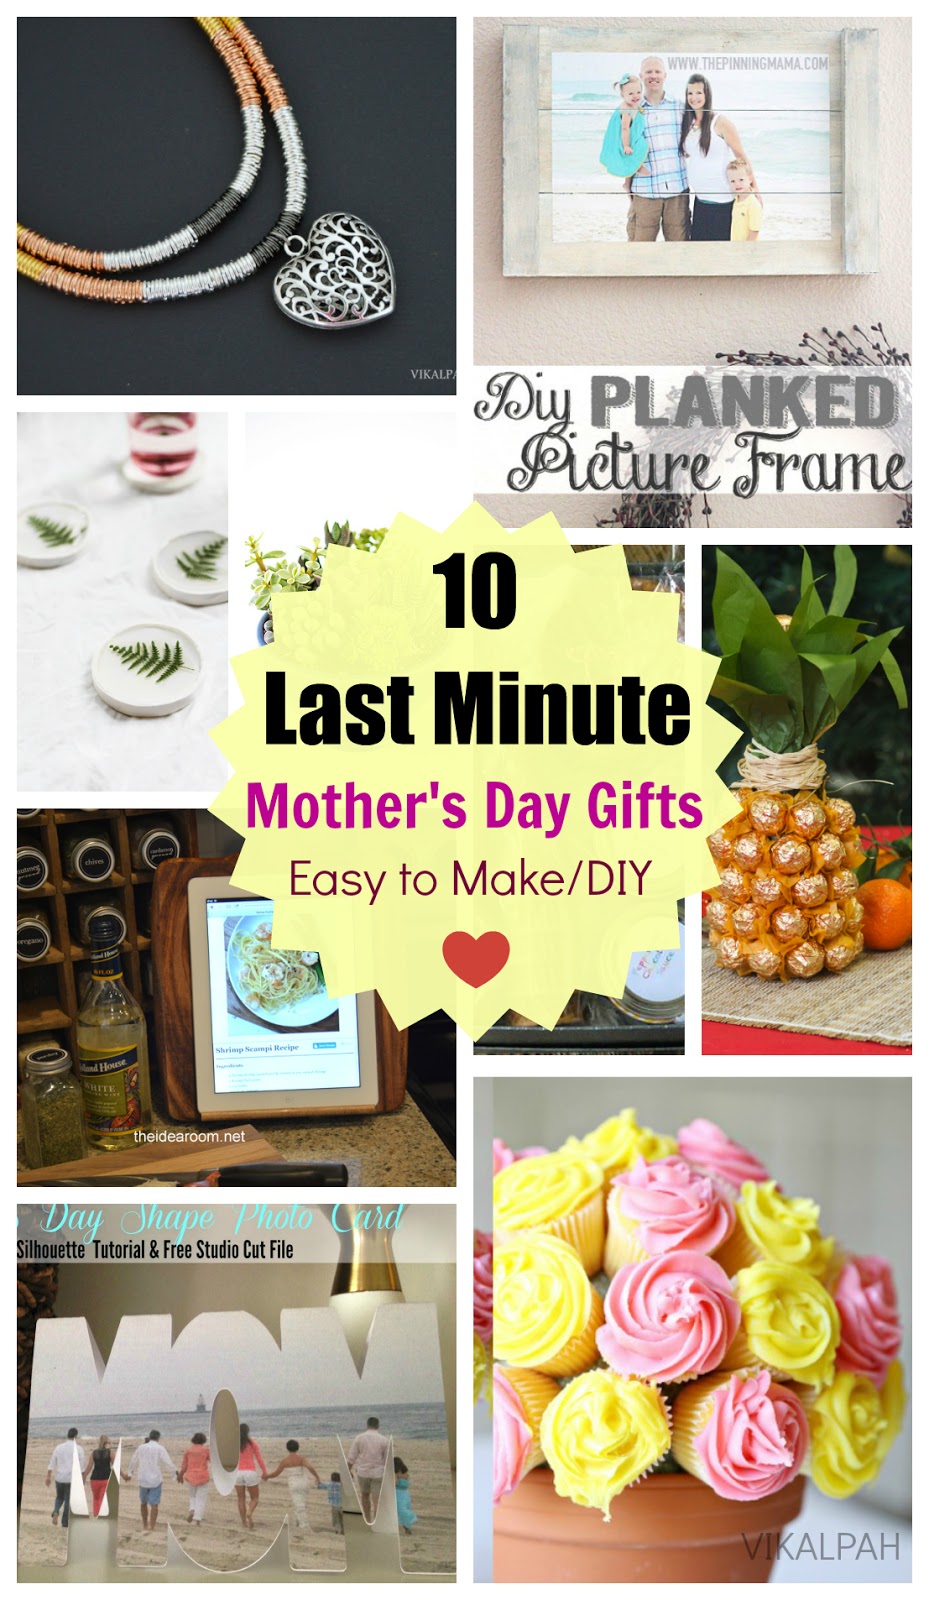 LAST MINUTE/ DIY Mother's Day Gifts!